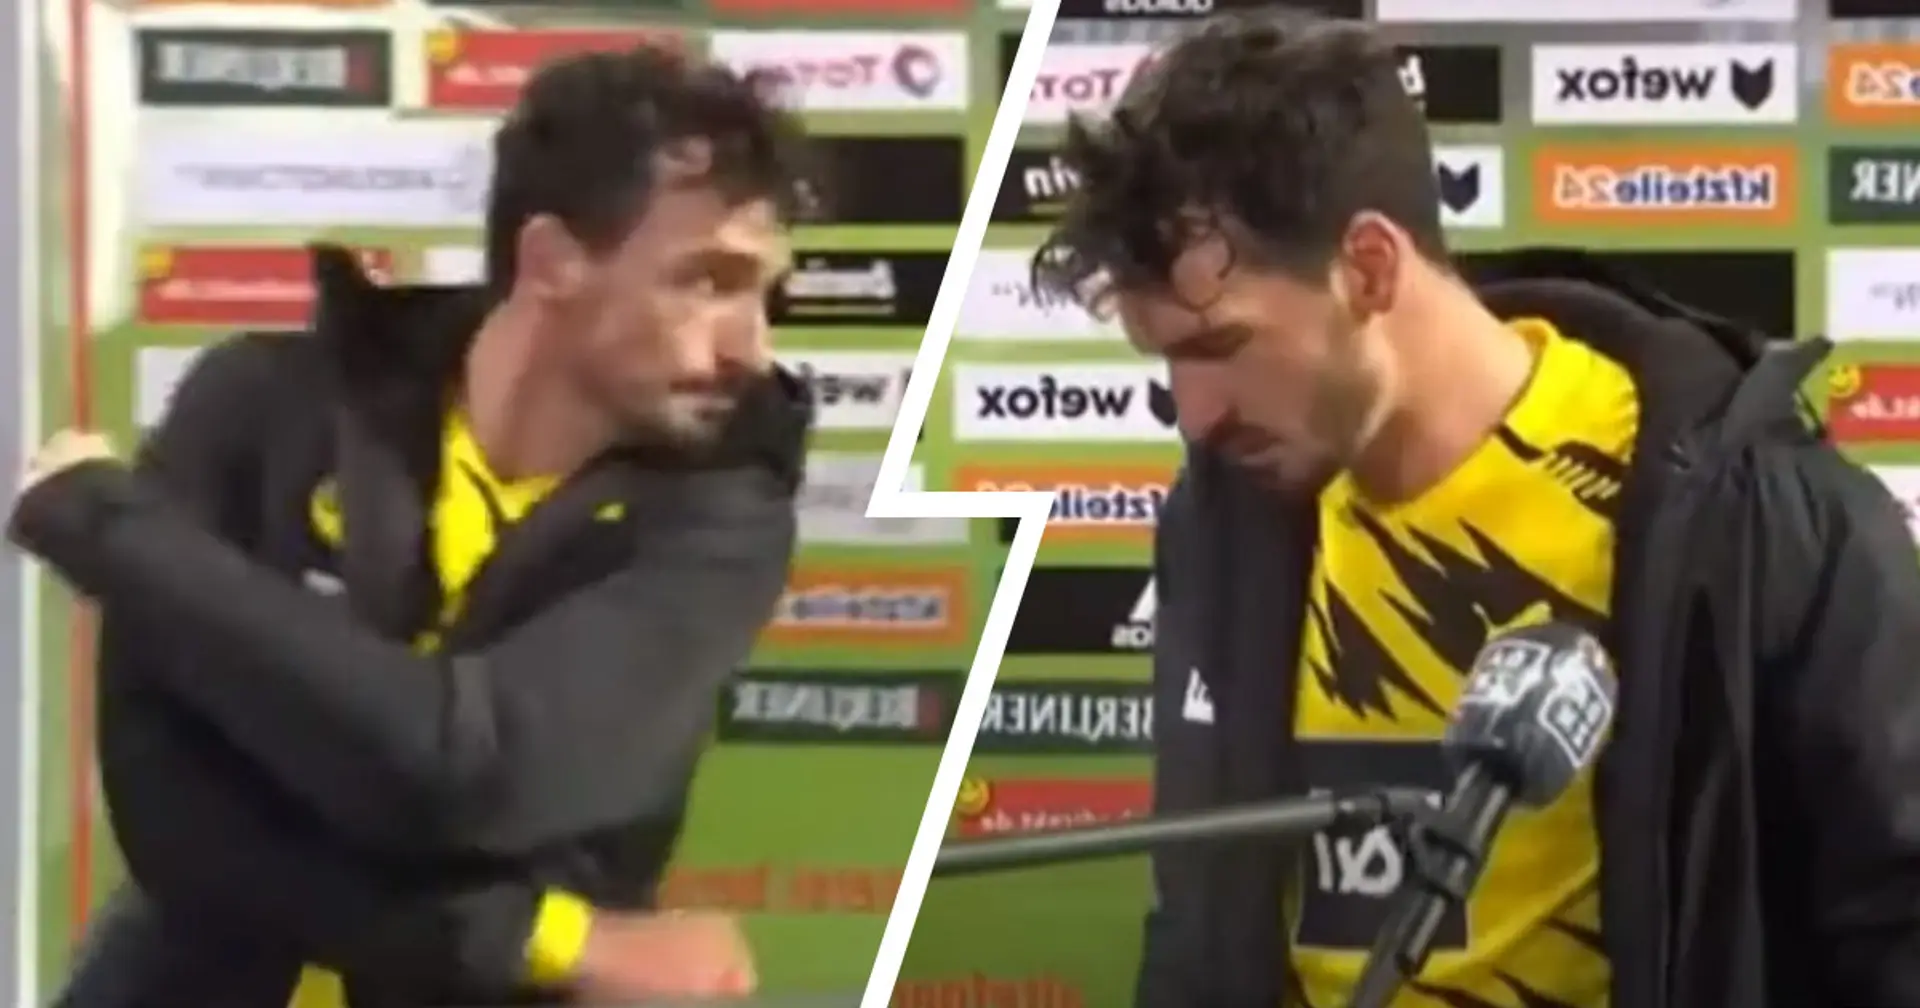 Mats Hummels punches interview advertising board in anger after Borussia Dortmund’s loss